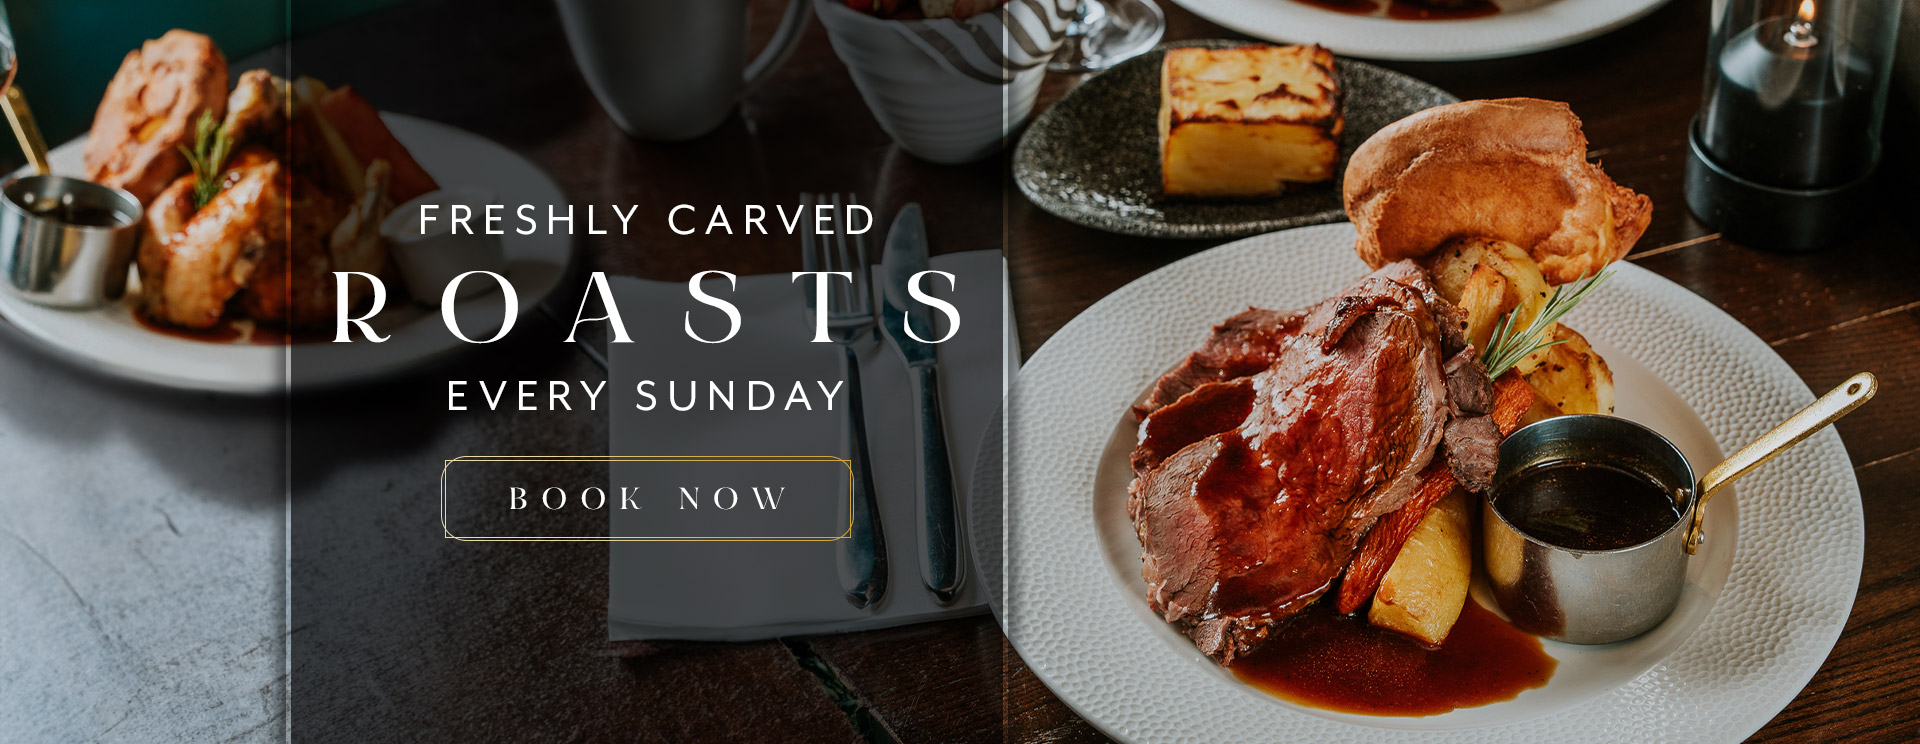 Sunday Lunch at The St George & Dragon